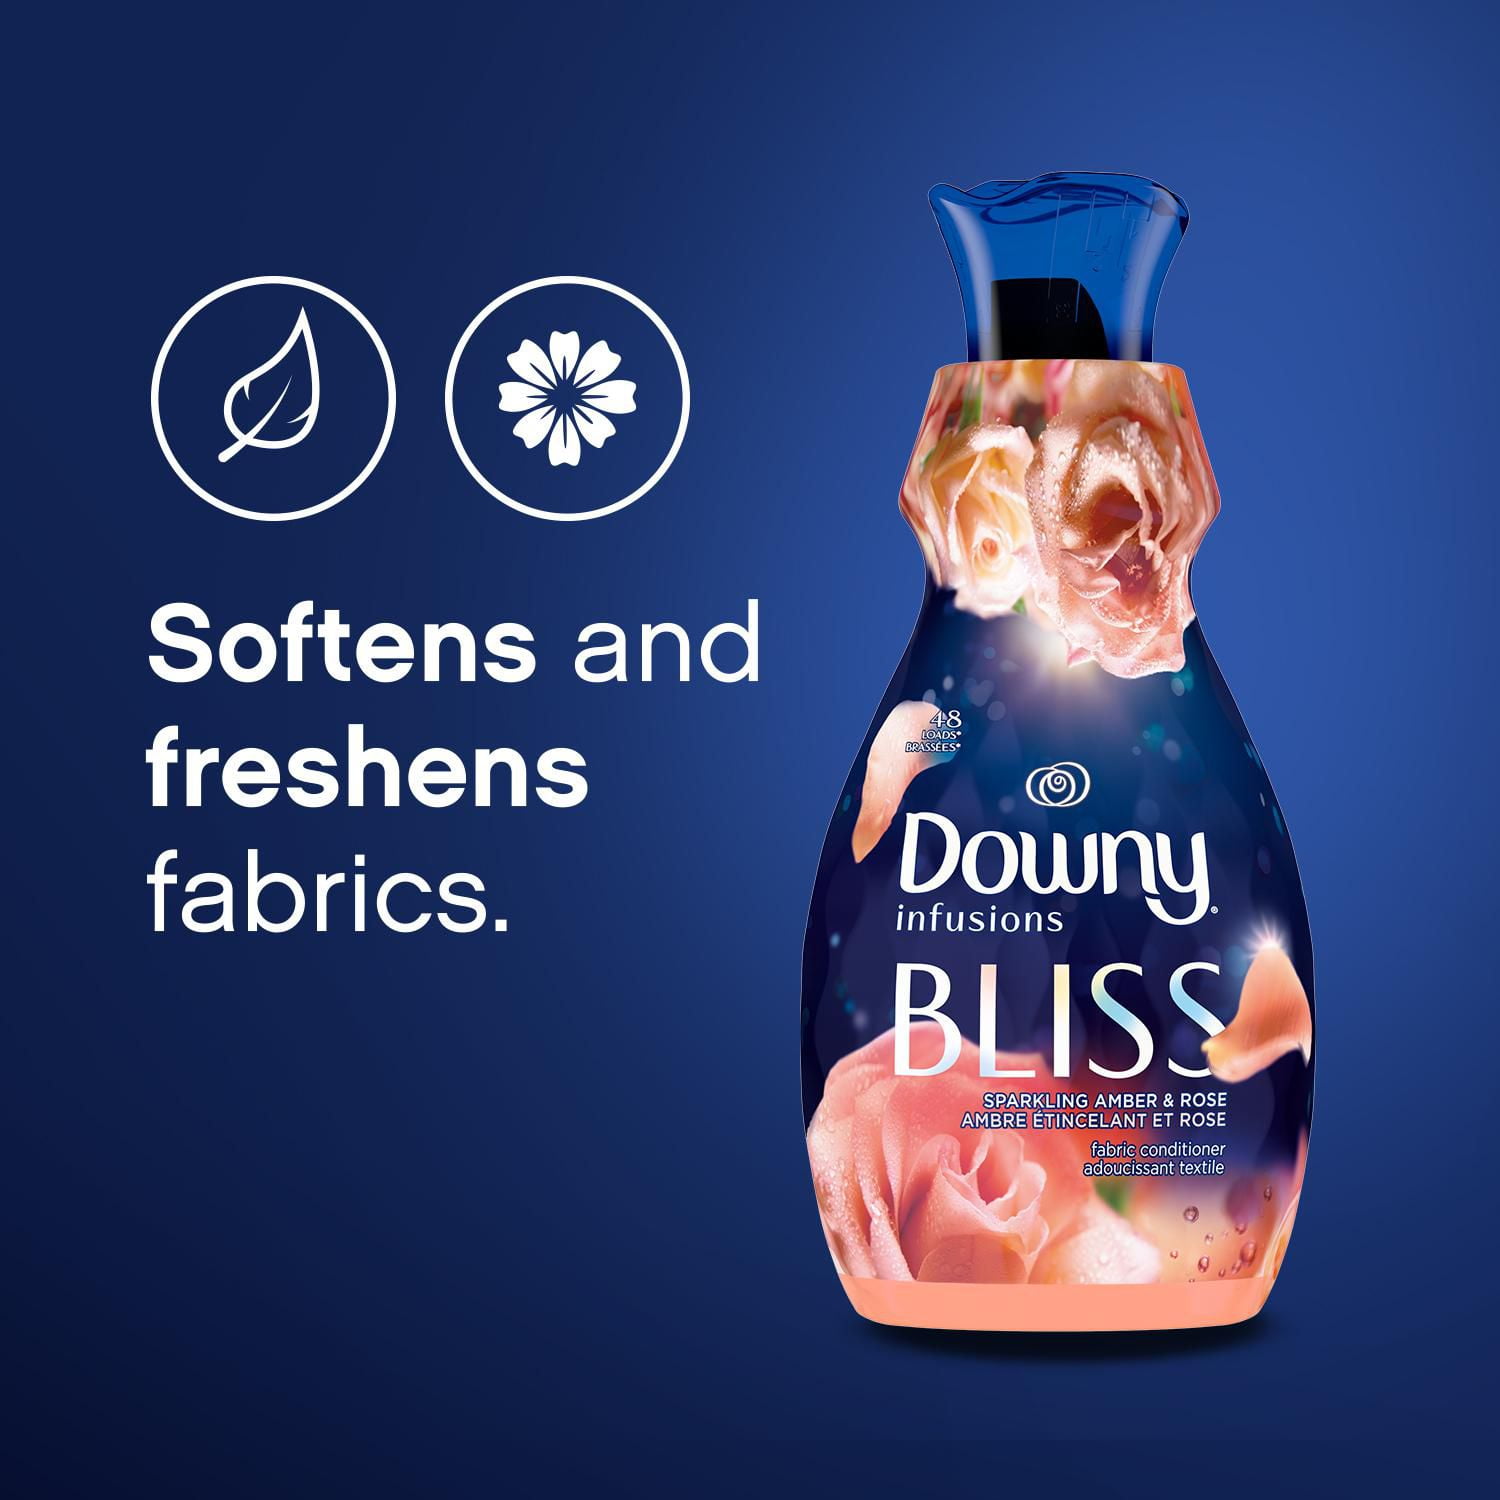 Downy RINSE & REFRESH Laundry Odor Remover and Fabric Softener, Cool Cotton,  HE Compatible, 70 Loads, 1.41 L 